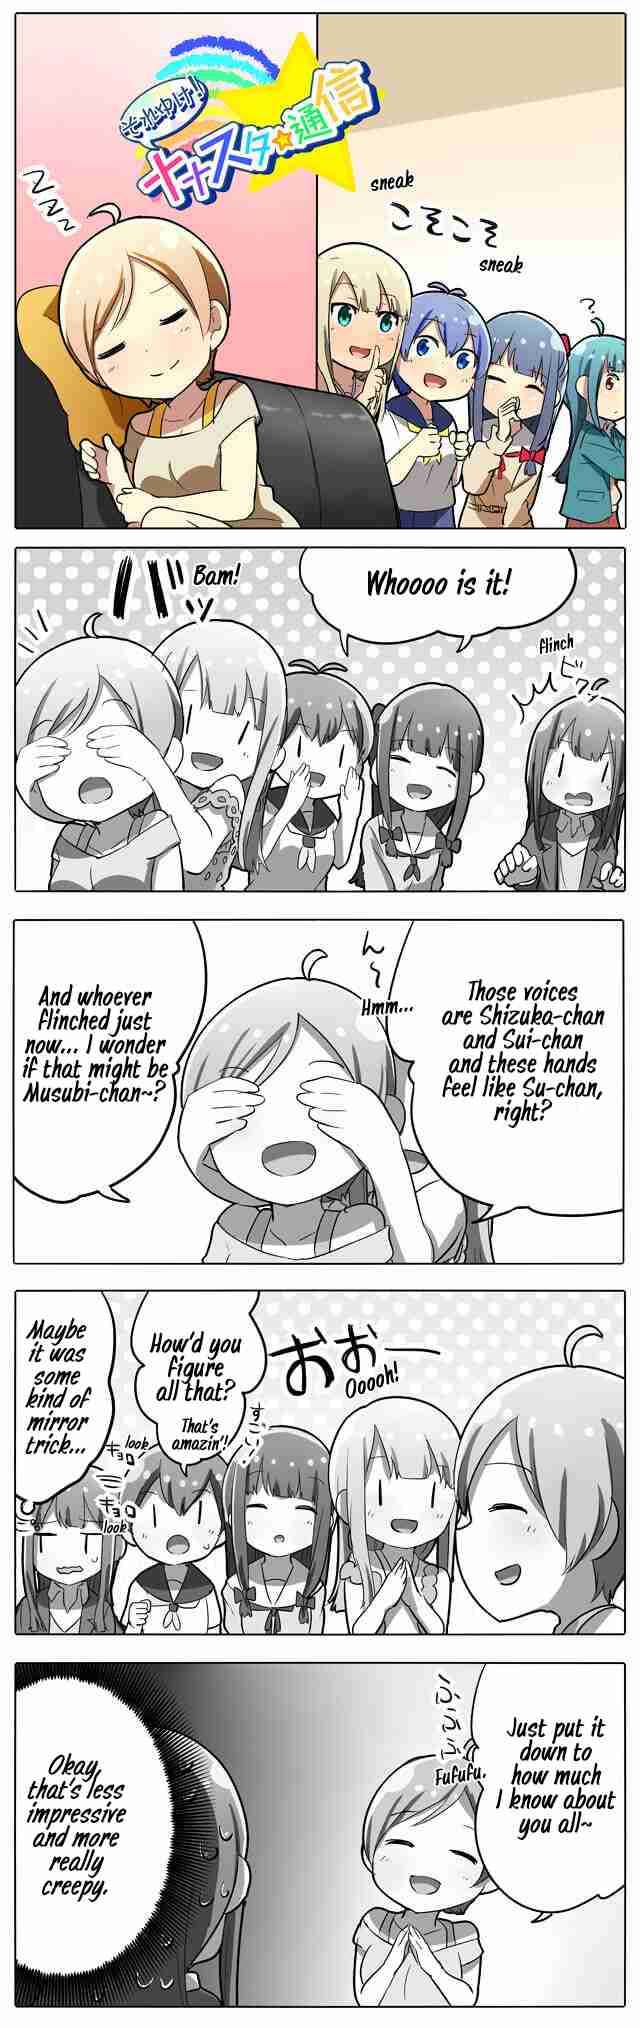 Let's Go! Nanastar Comms Ch. 53 Covering Your Eyes